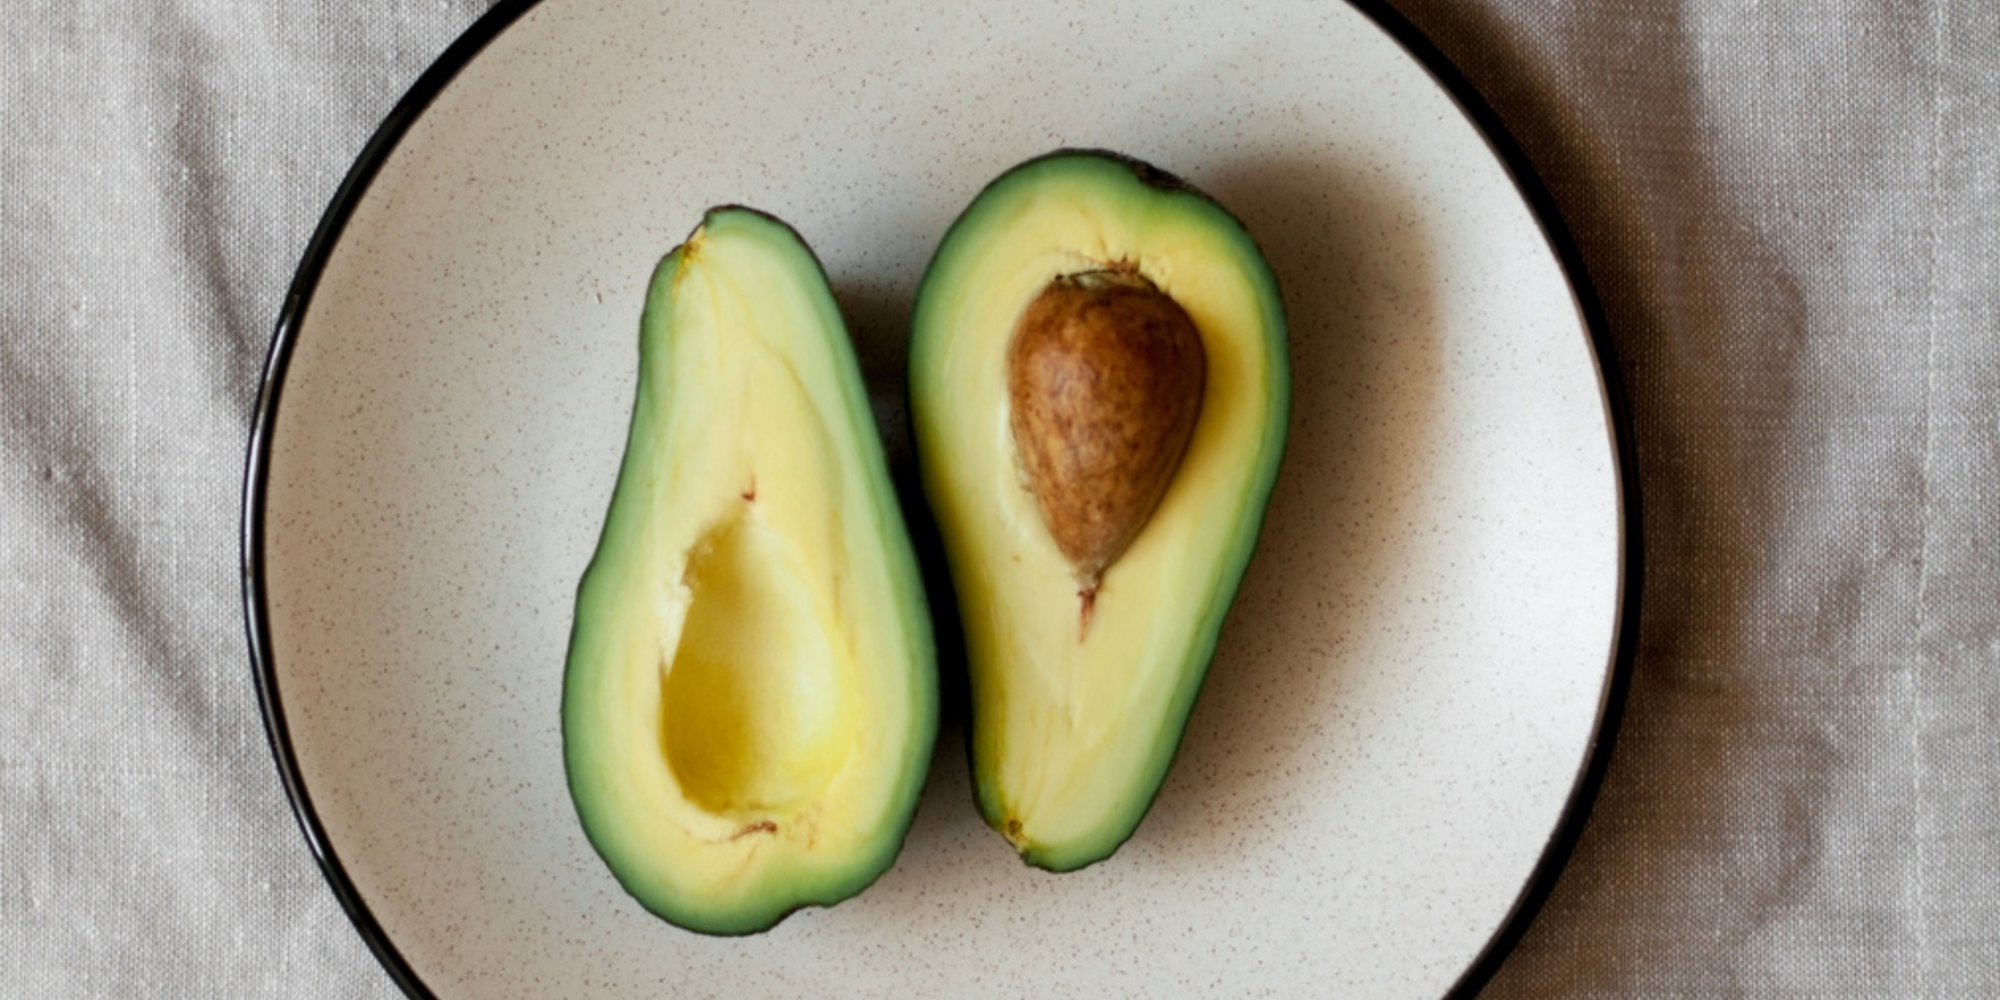 Avocado Oil: The Skin Staple for a Moisturized and Soothed Complexion